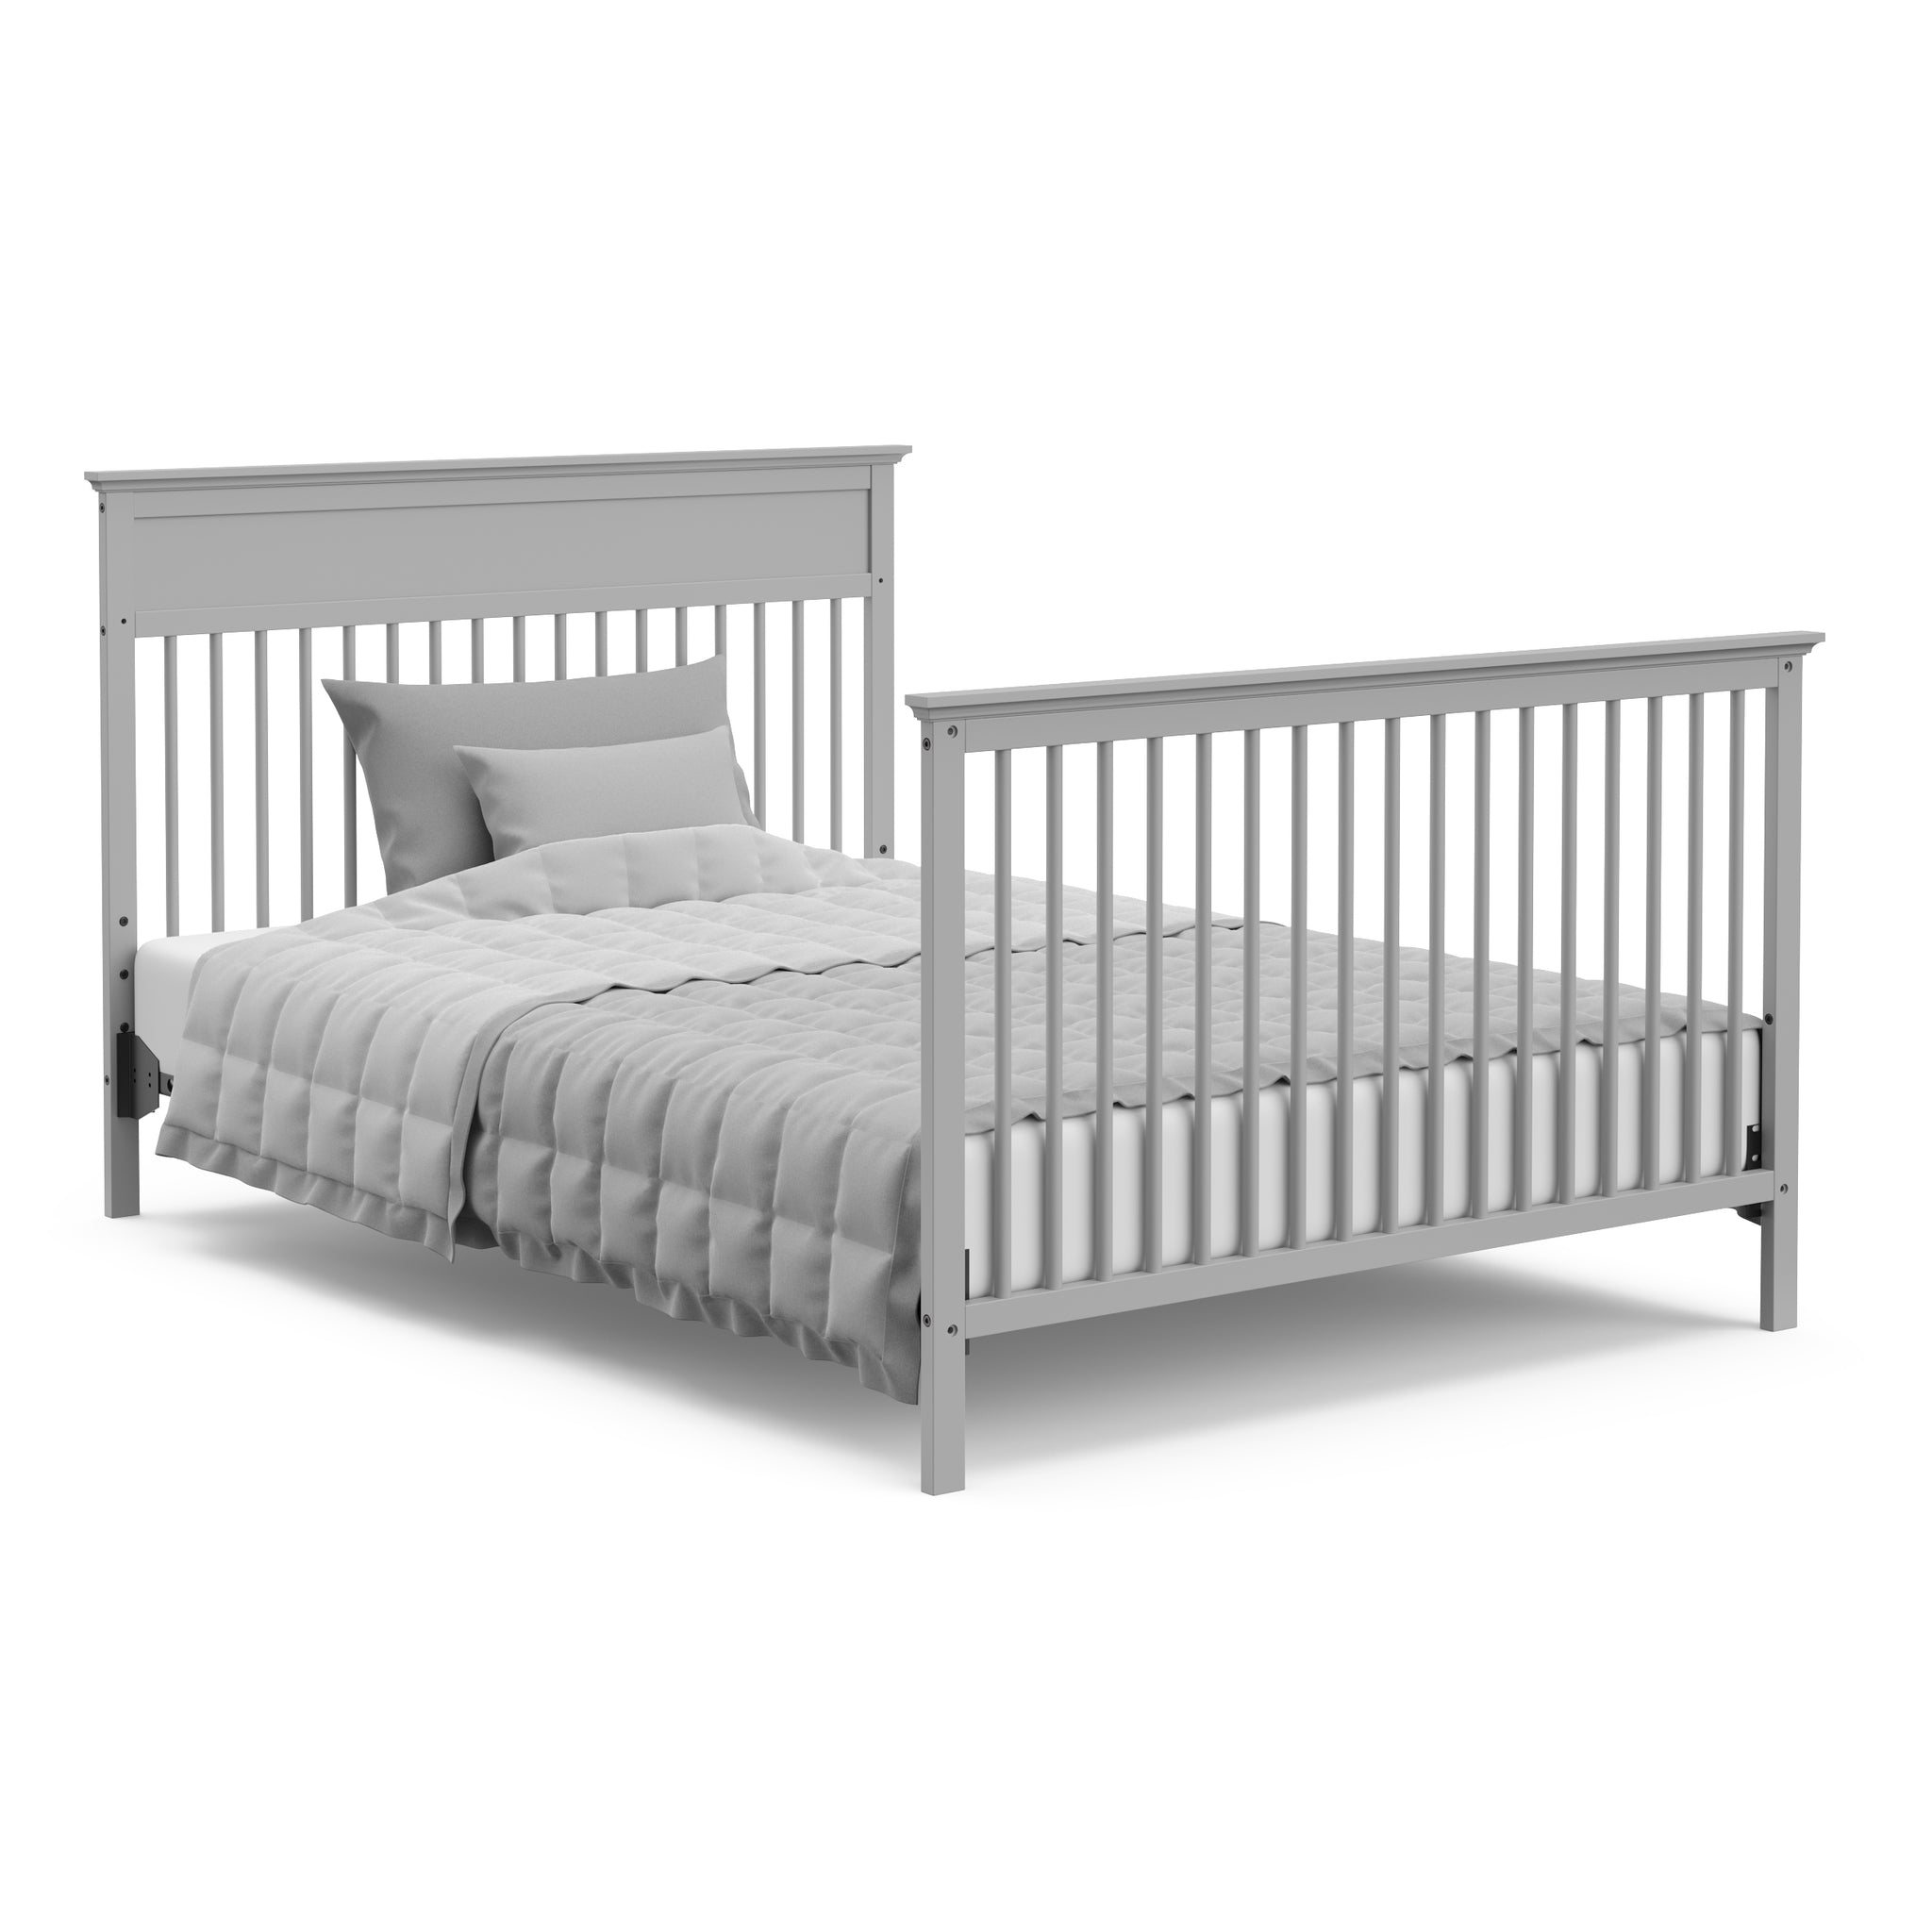 pebble gray crib in full-size bed with headboard and footboard conversion